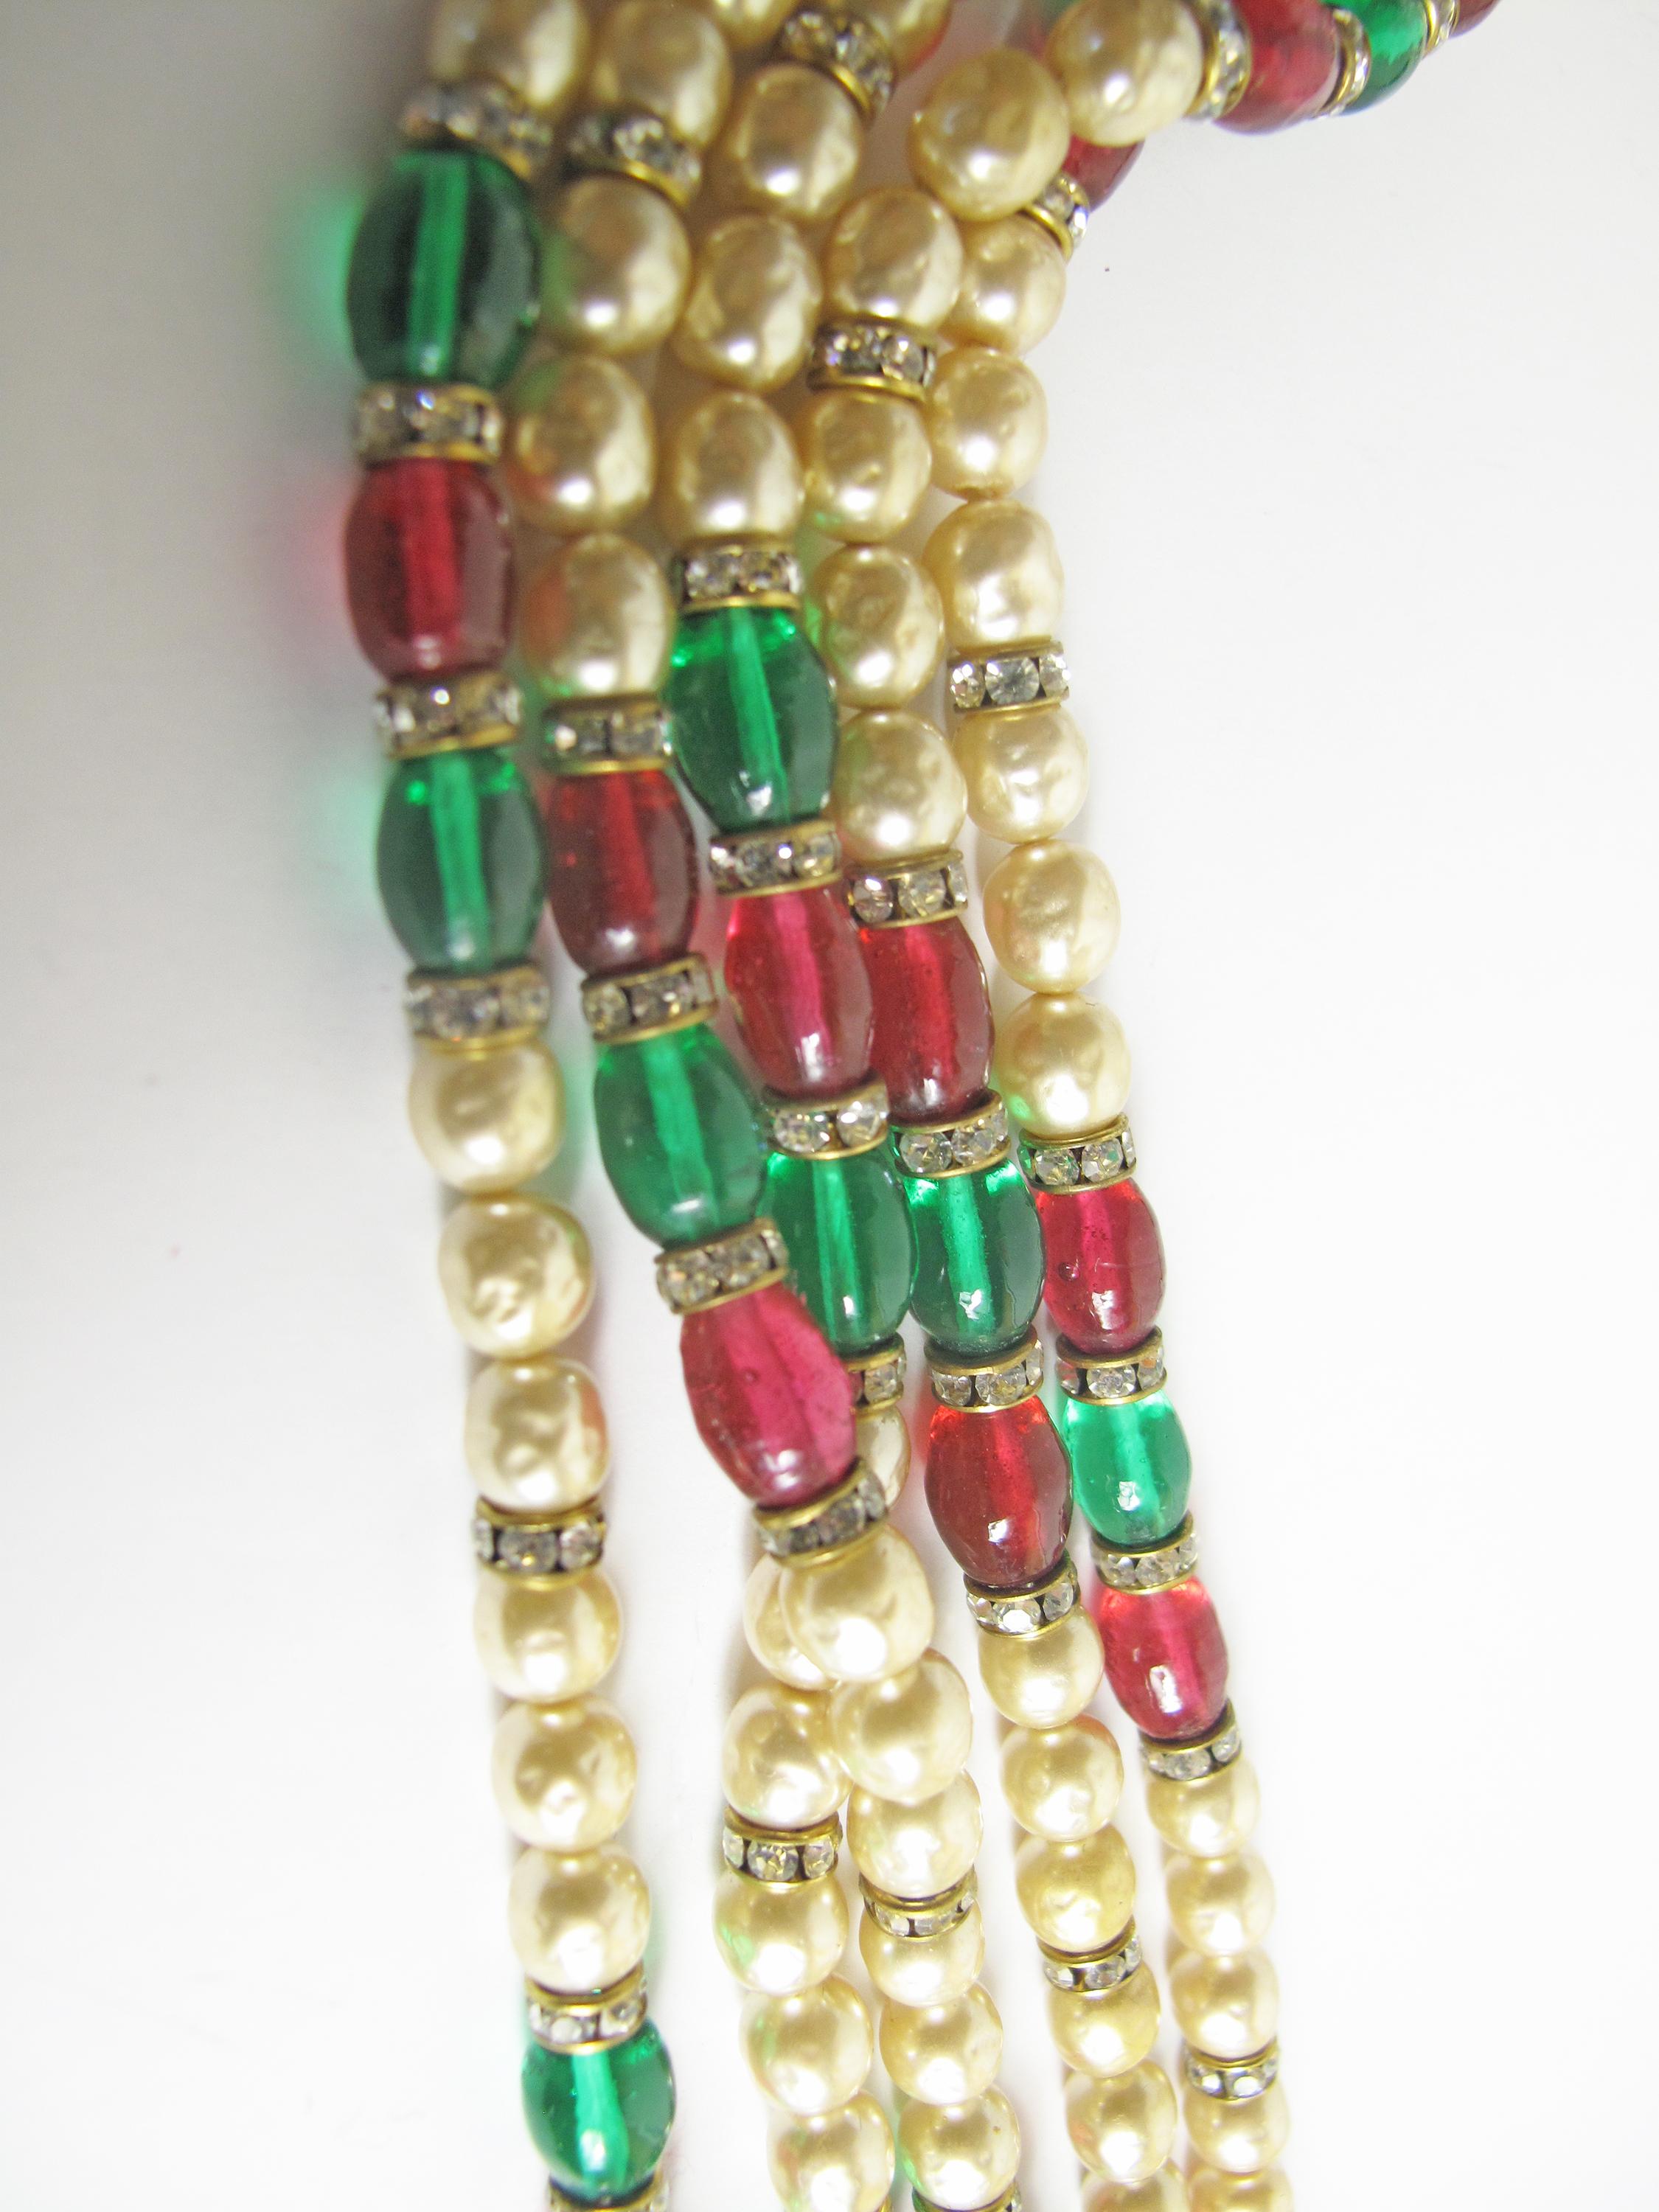 1970s Gold-tone Chanel multi-strand necklace featuring crystal accents, gripoix, faux pearls and hook closure. Chain Length 36“ . Condition: Very good, light scratches and tarnish at metal. 